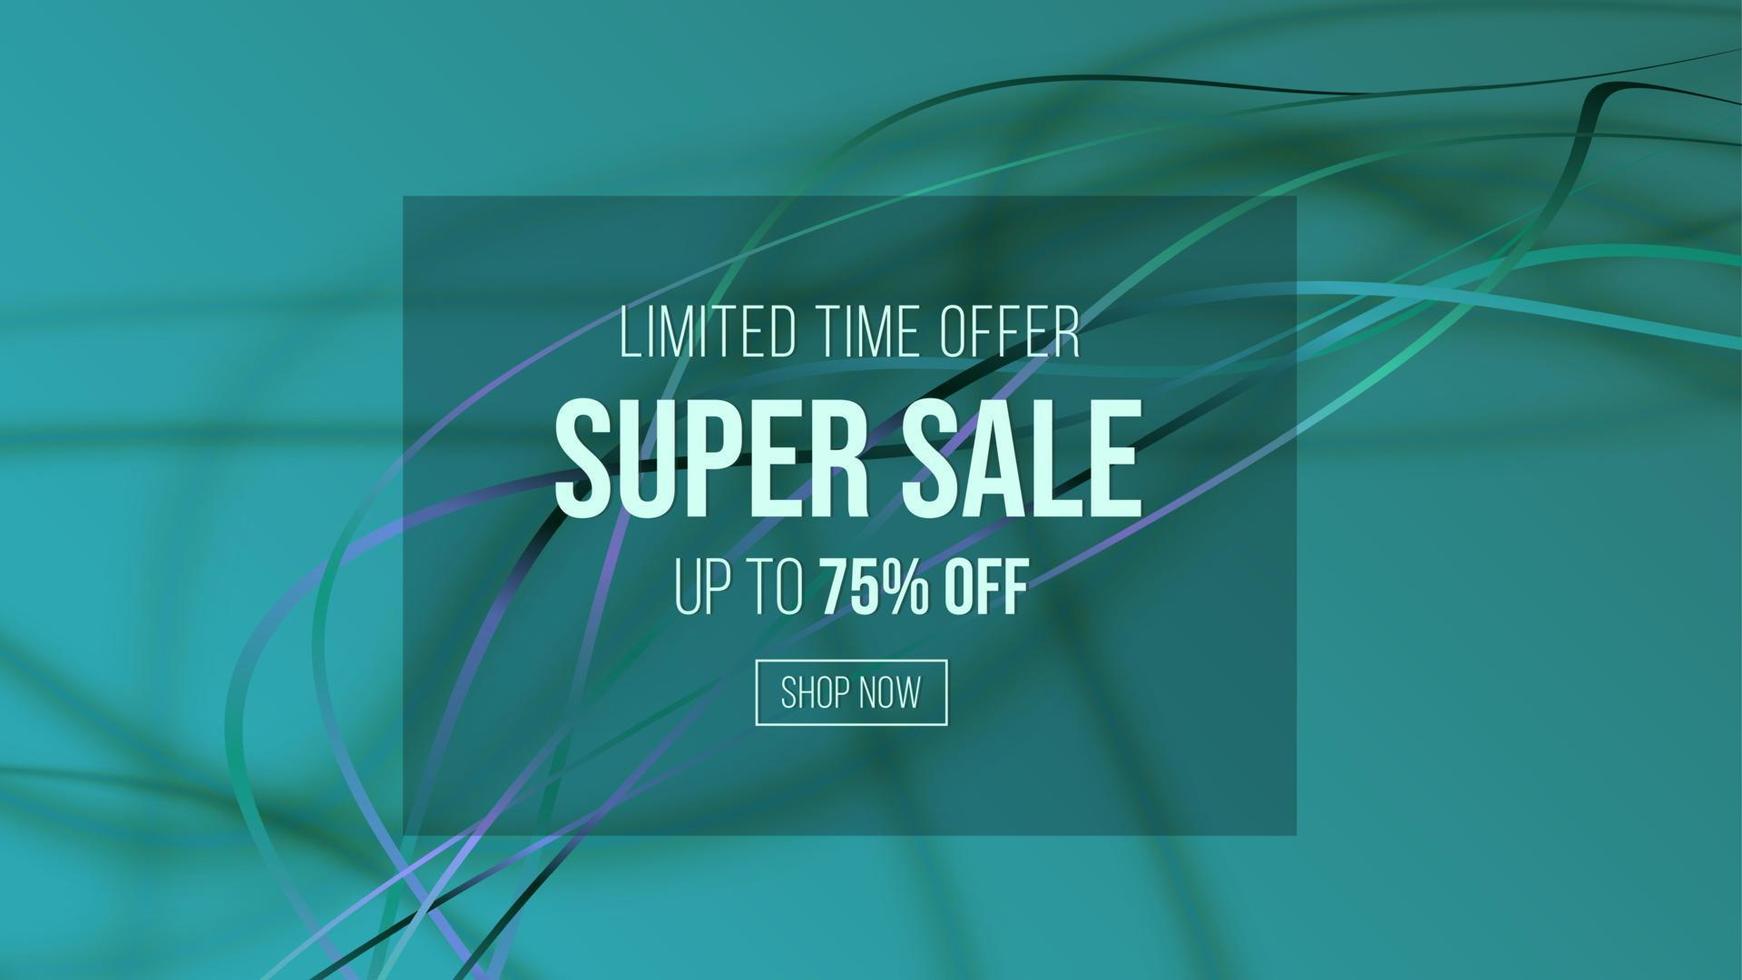 Sale banner green turquoise color template design with geometric background , Big sale special offer off. Super Sale, end of season special offer banner. vector illustration.